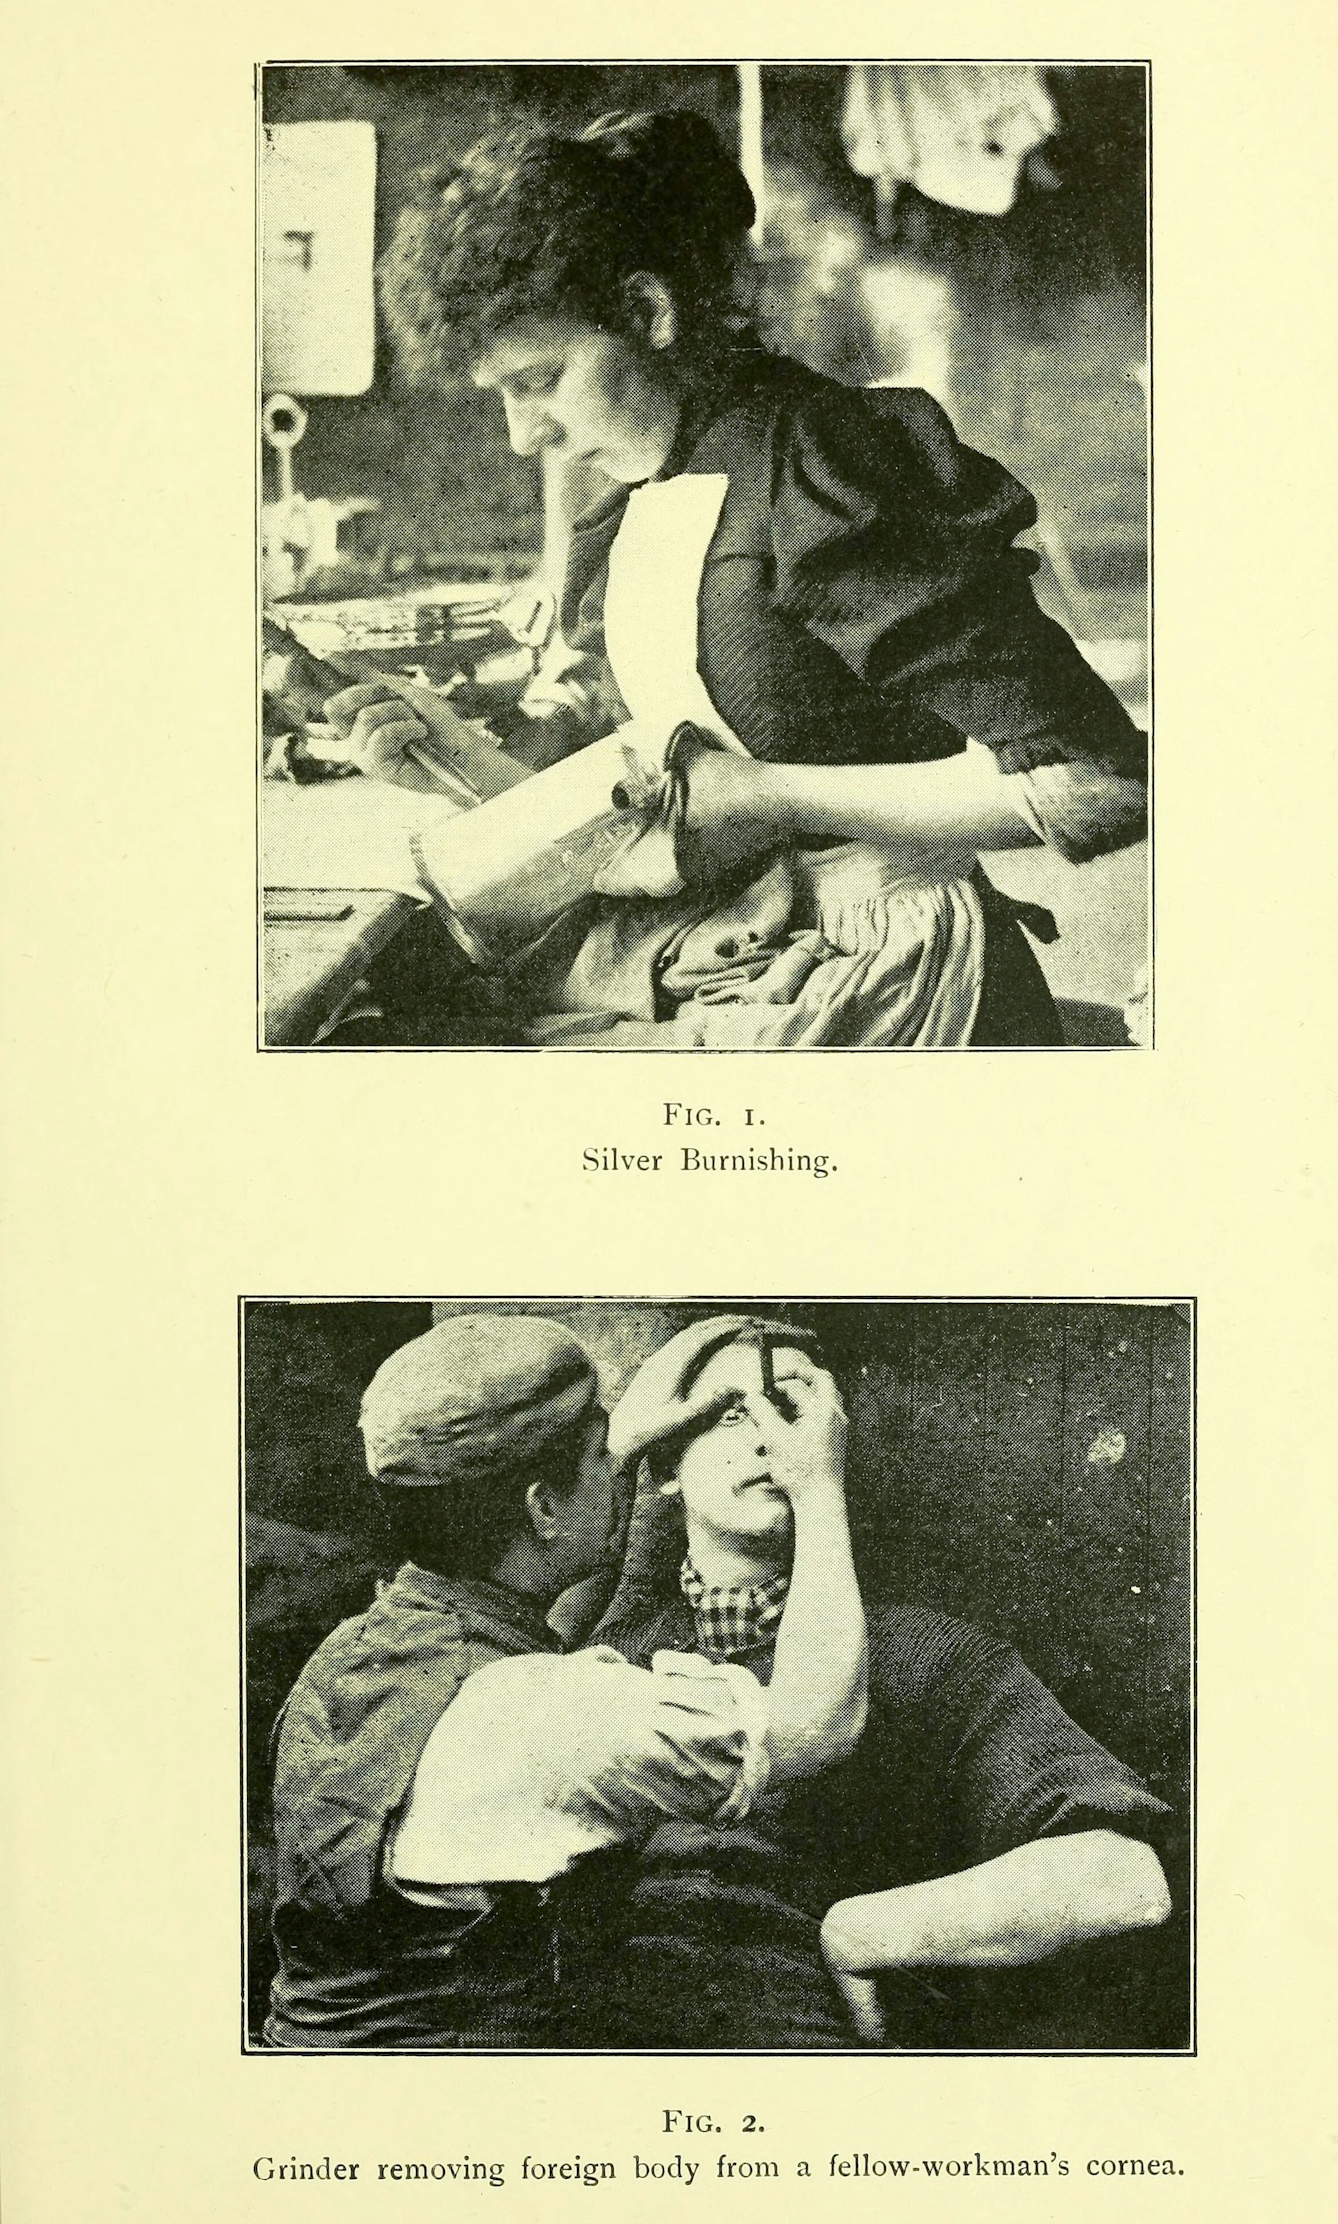 Two grainy black and white photographs on a page. The top one, labelled "silver burnishing" is a woman wearing an apron holding a silver vessel in one hand and a tool in the other. The bottom one is of two men in working clothes. One is removing a "foreign body from a fellow-workman's cornea".